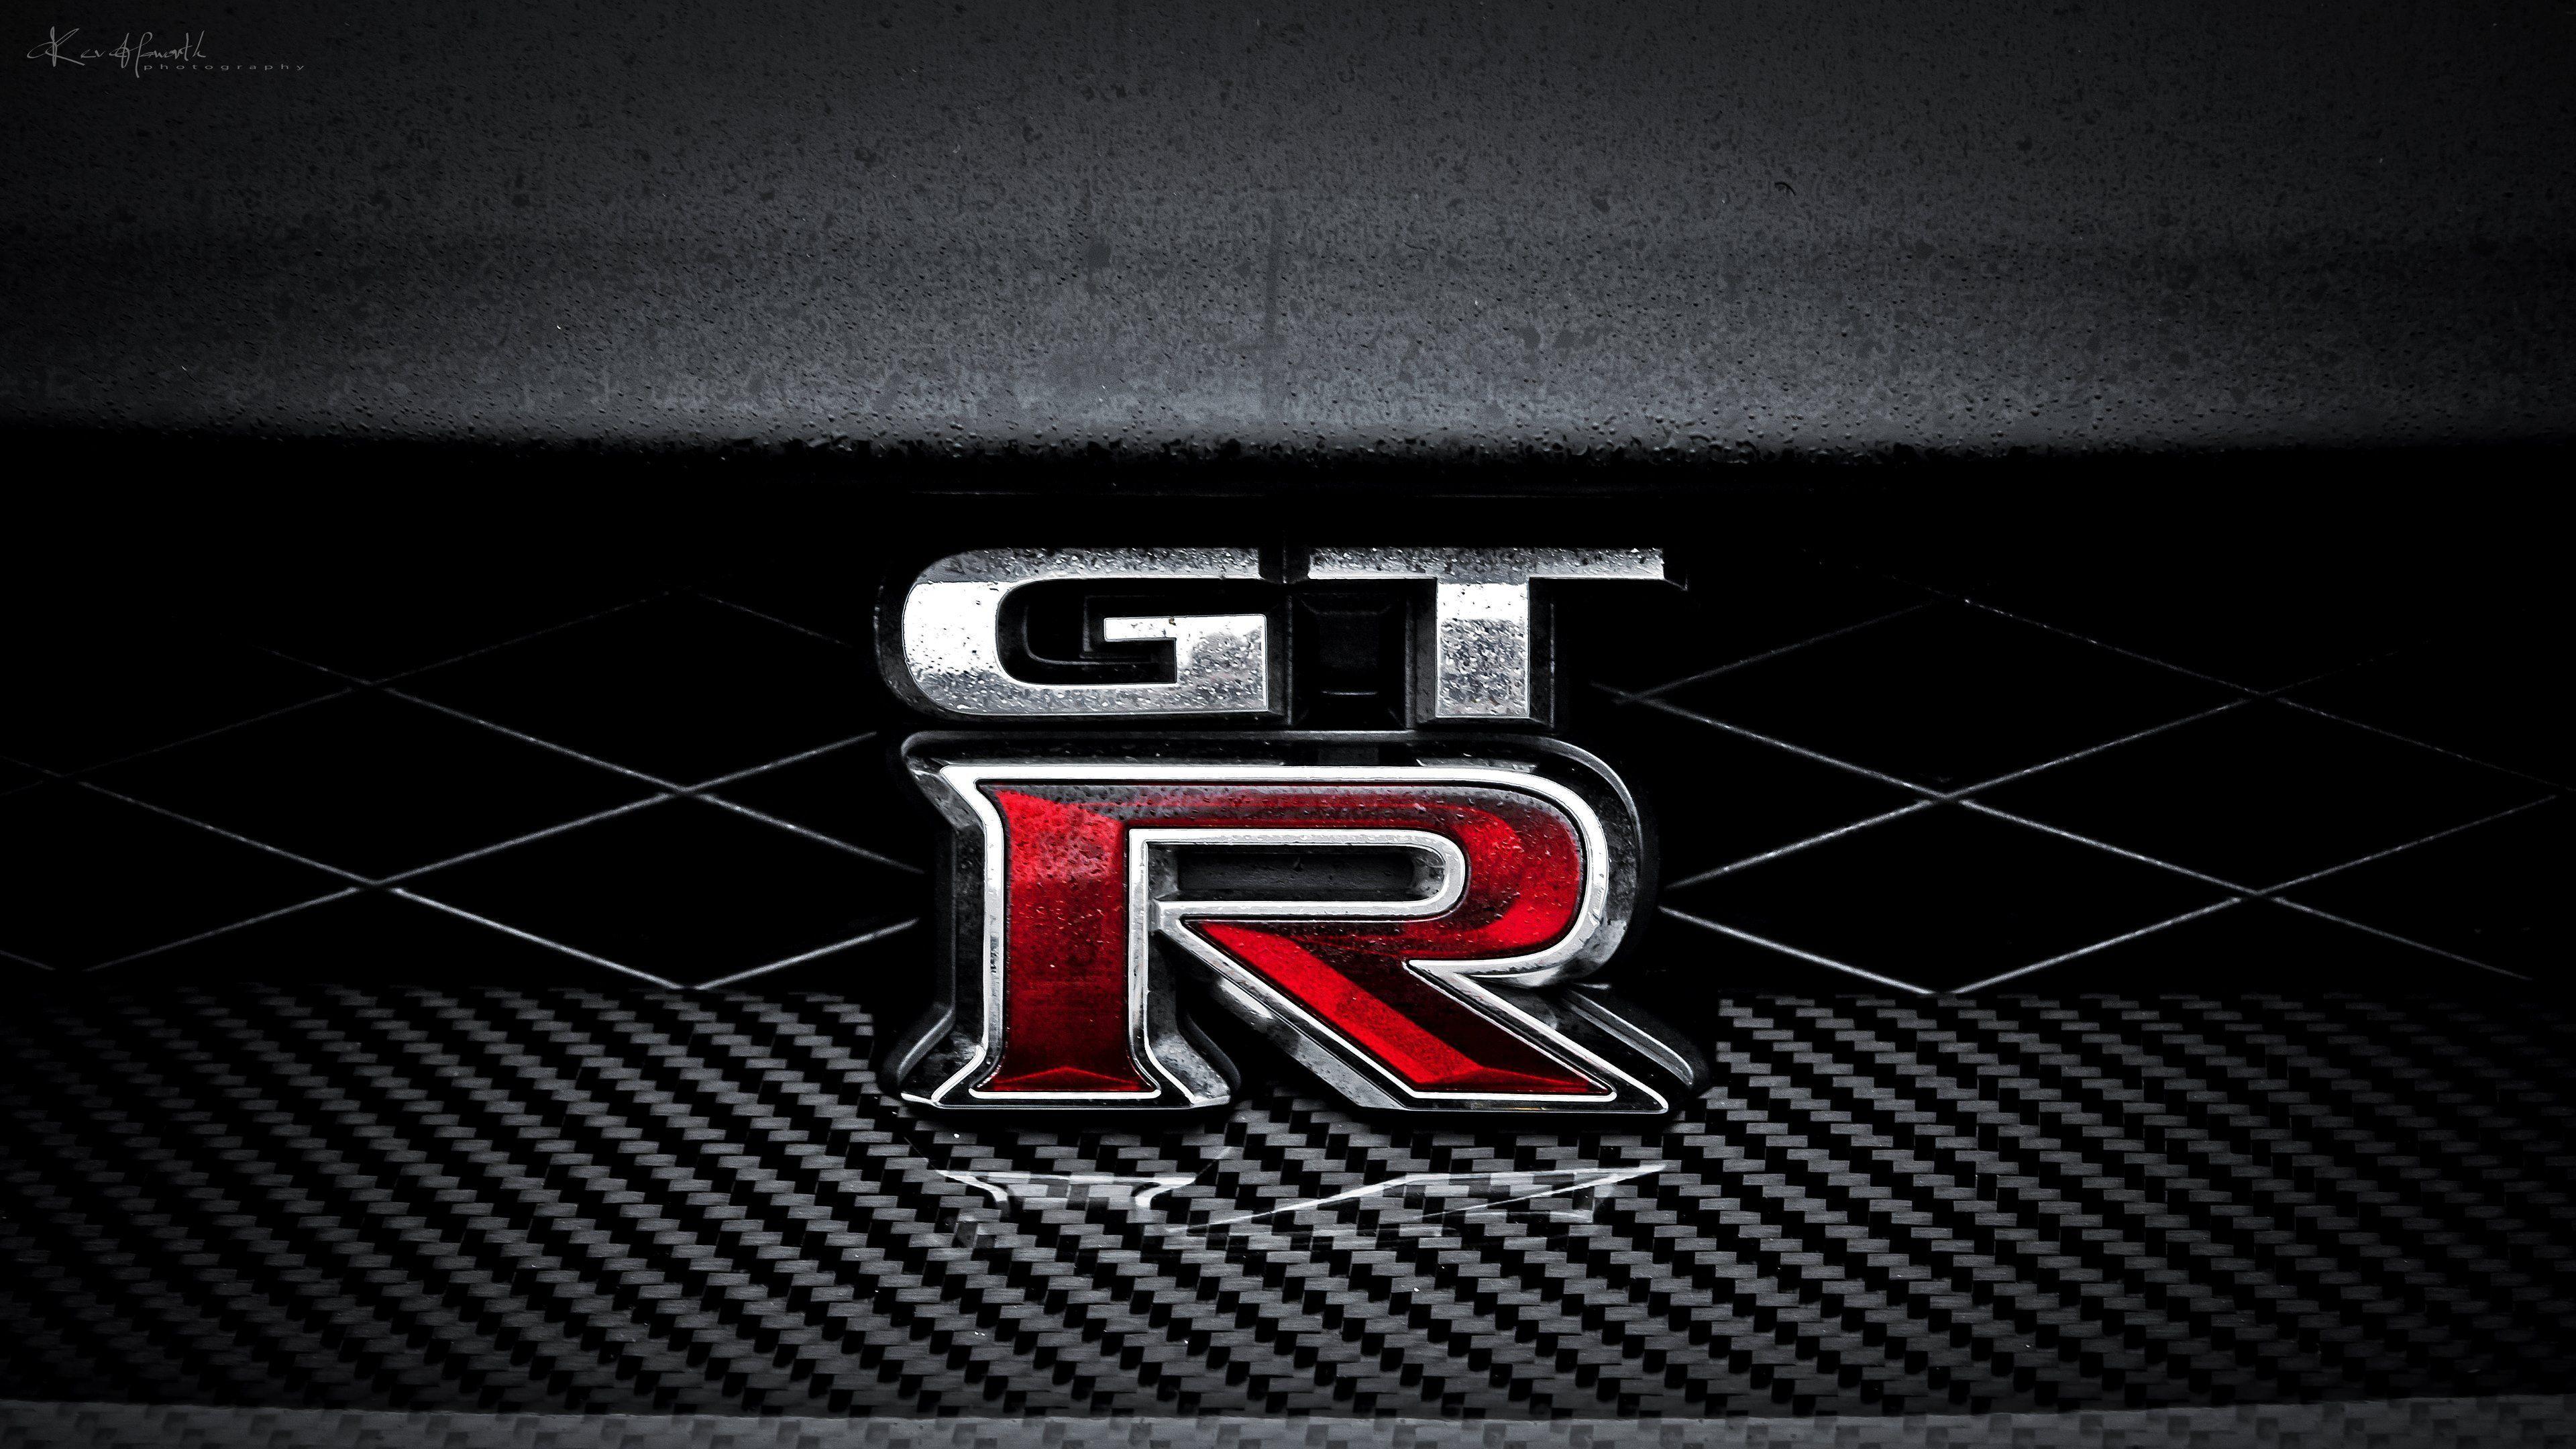 Nissan GTR Engine and Logo Wallpaper in HD, 4K and wide sizes